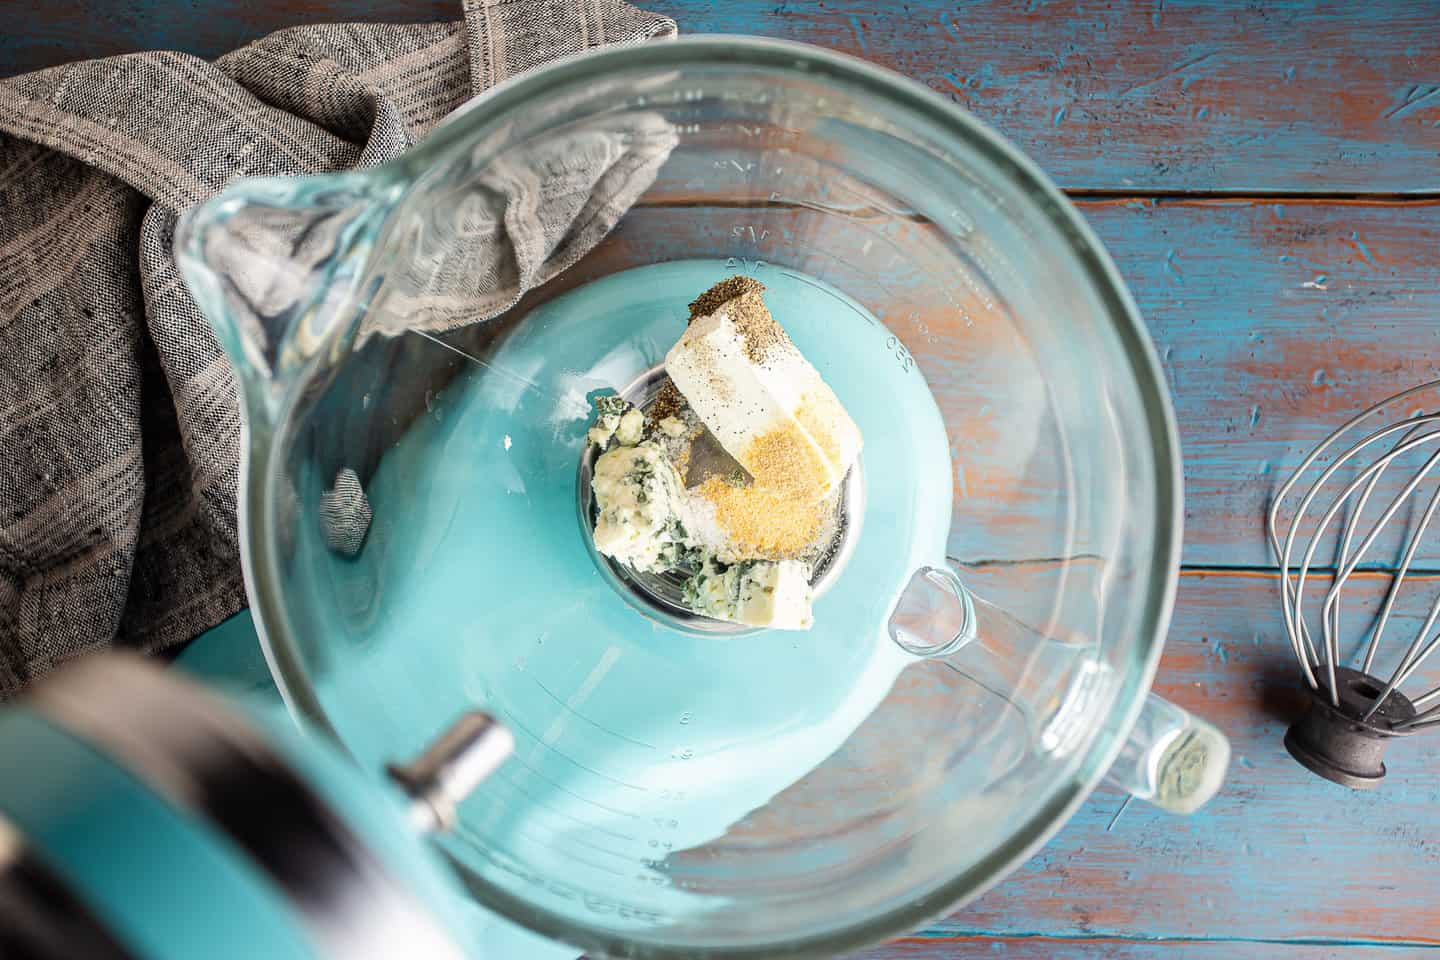 Cream cheese, blue cheese, and seasonings in a large glass mixing bowl.